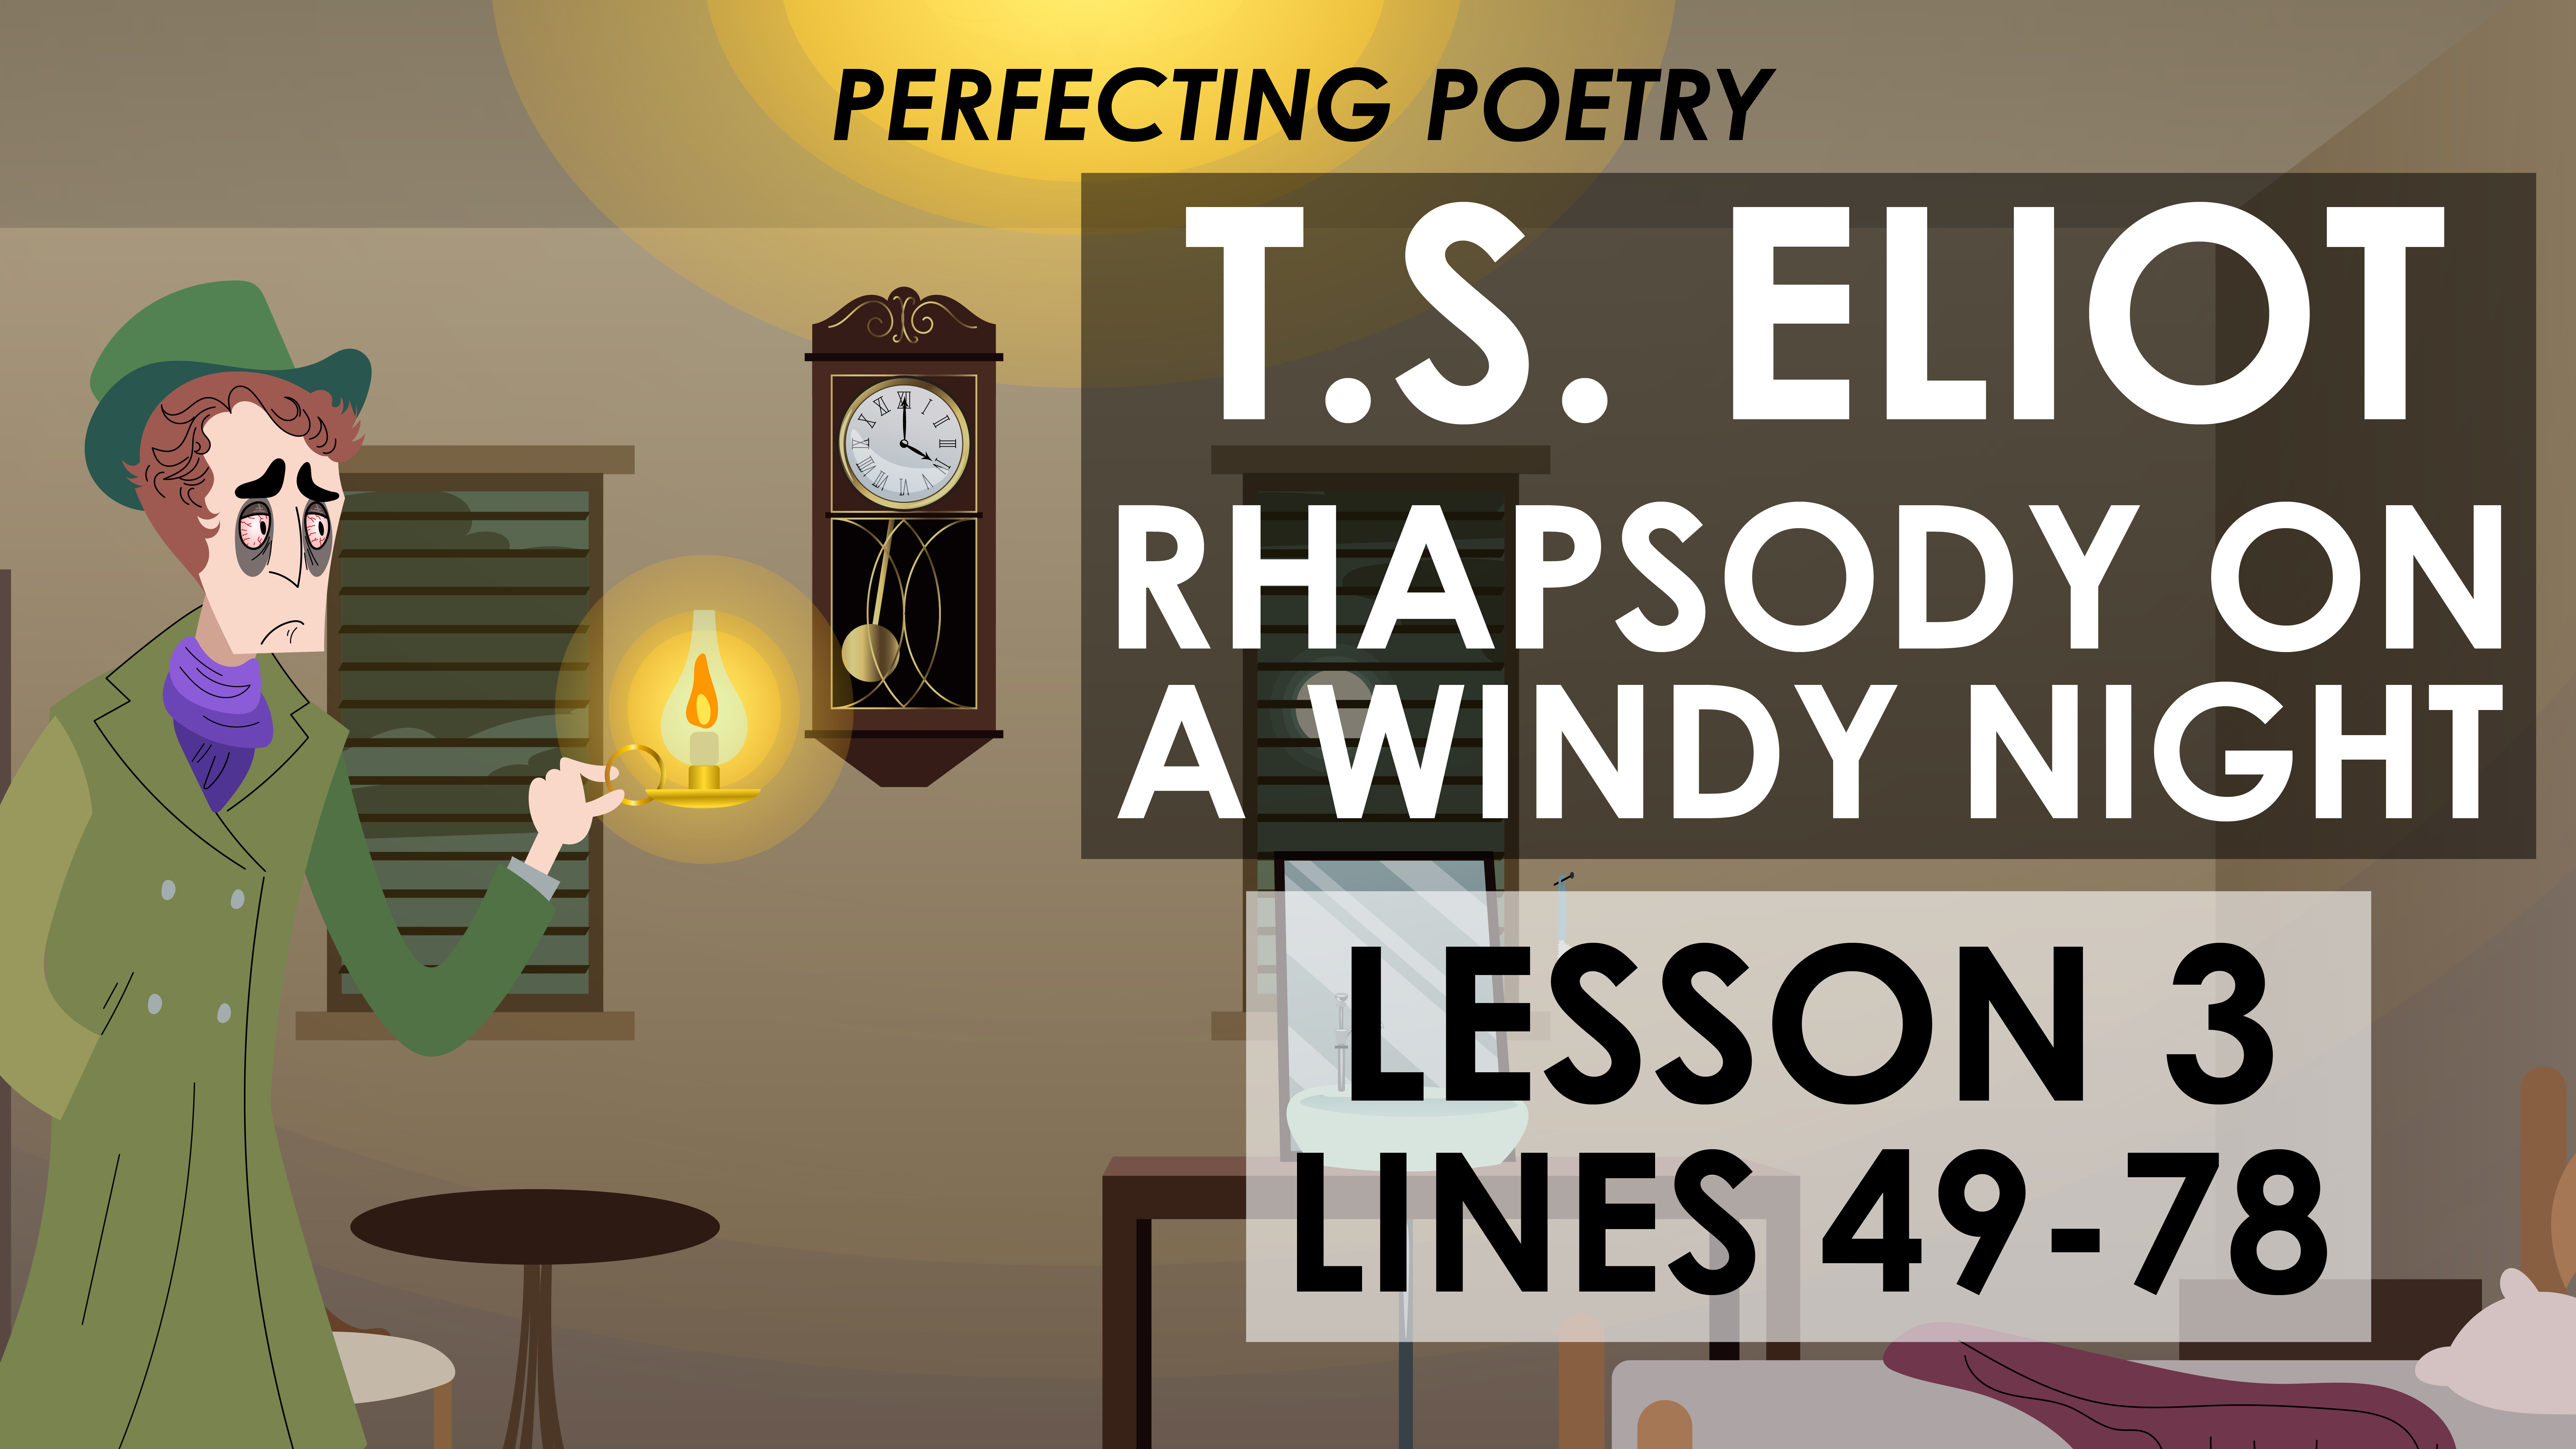 Rhapsody on a Windy Night - Lesson 3 - T.S. Eliot - Perfecting Poetry